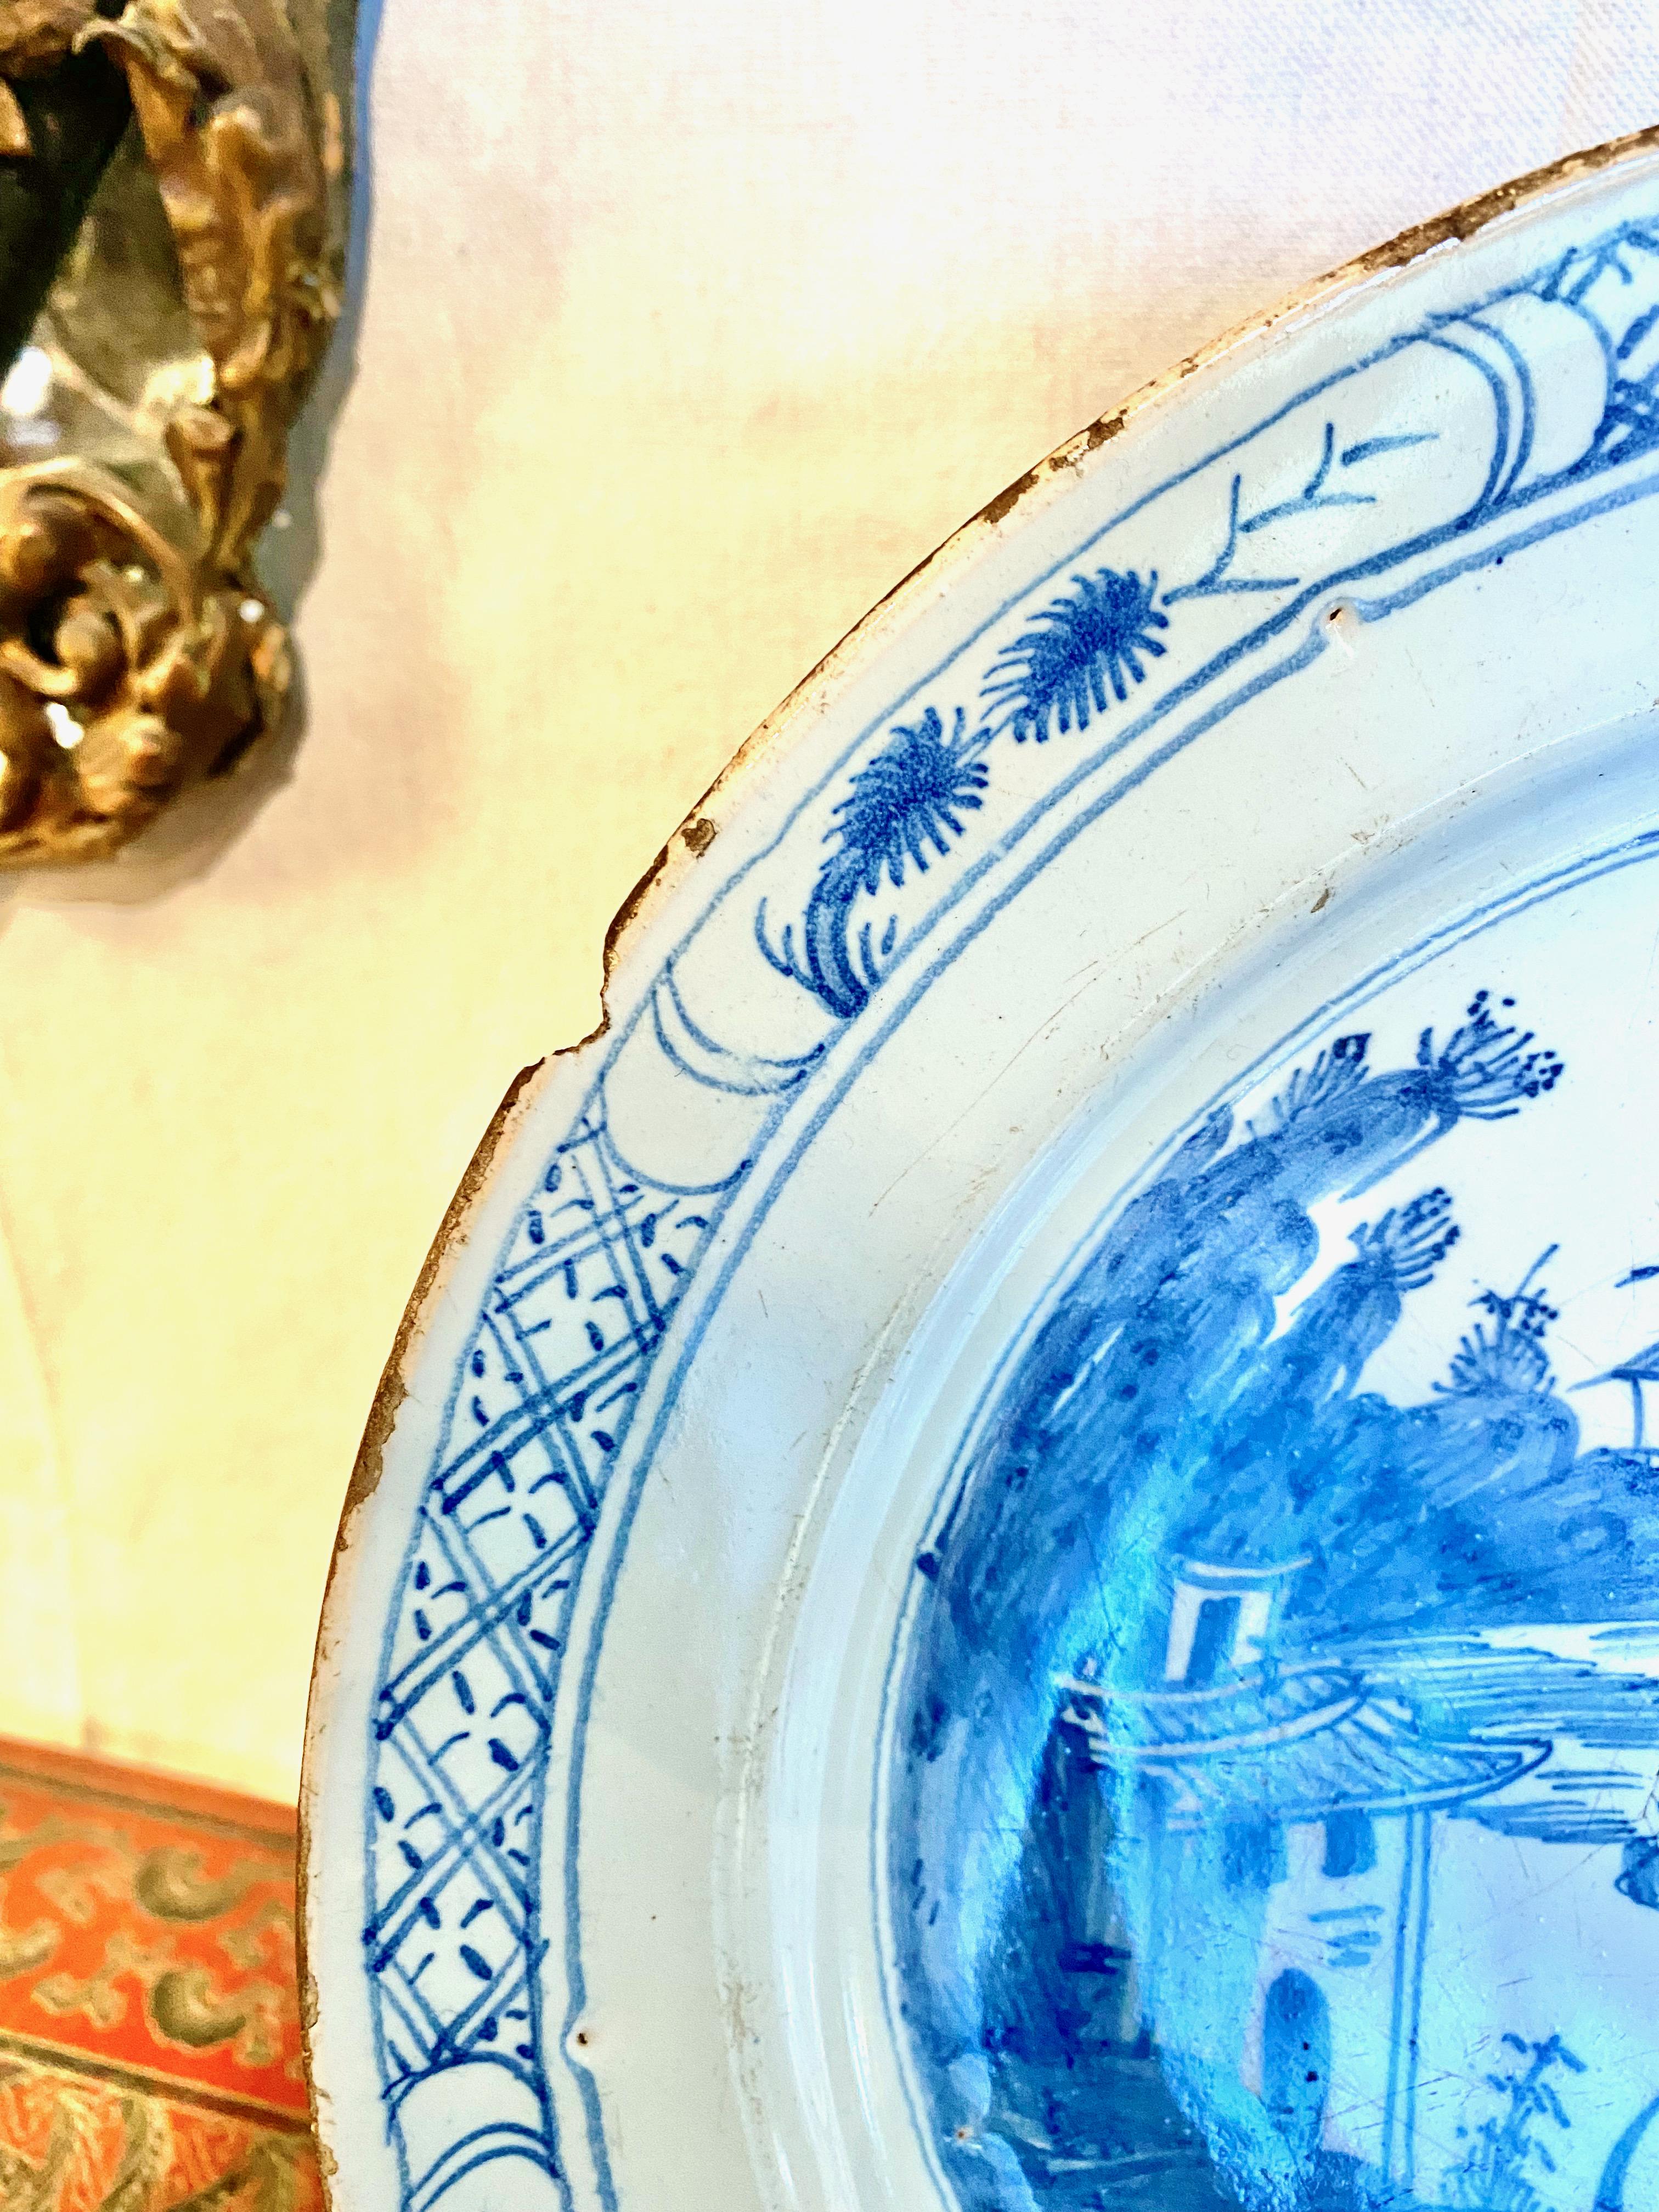 This is a good example of a mid-18th century Delft charger in a chinoiserie hand-painted pattern. The pottery is hand-painted in a traditional blue and white chinoiserie scene featuring a pagoda, lake and willow tree. This charger is a decorative